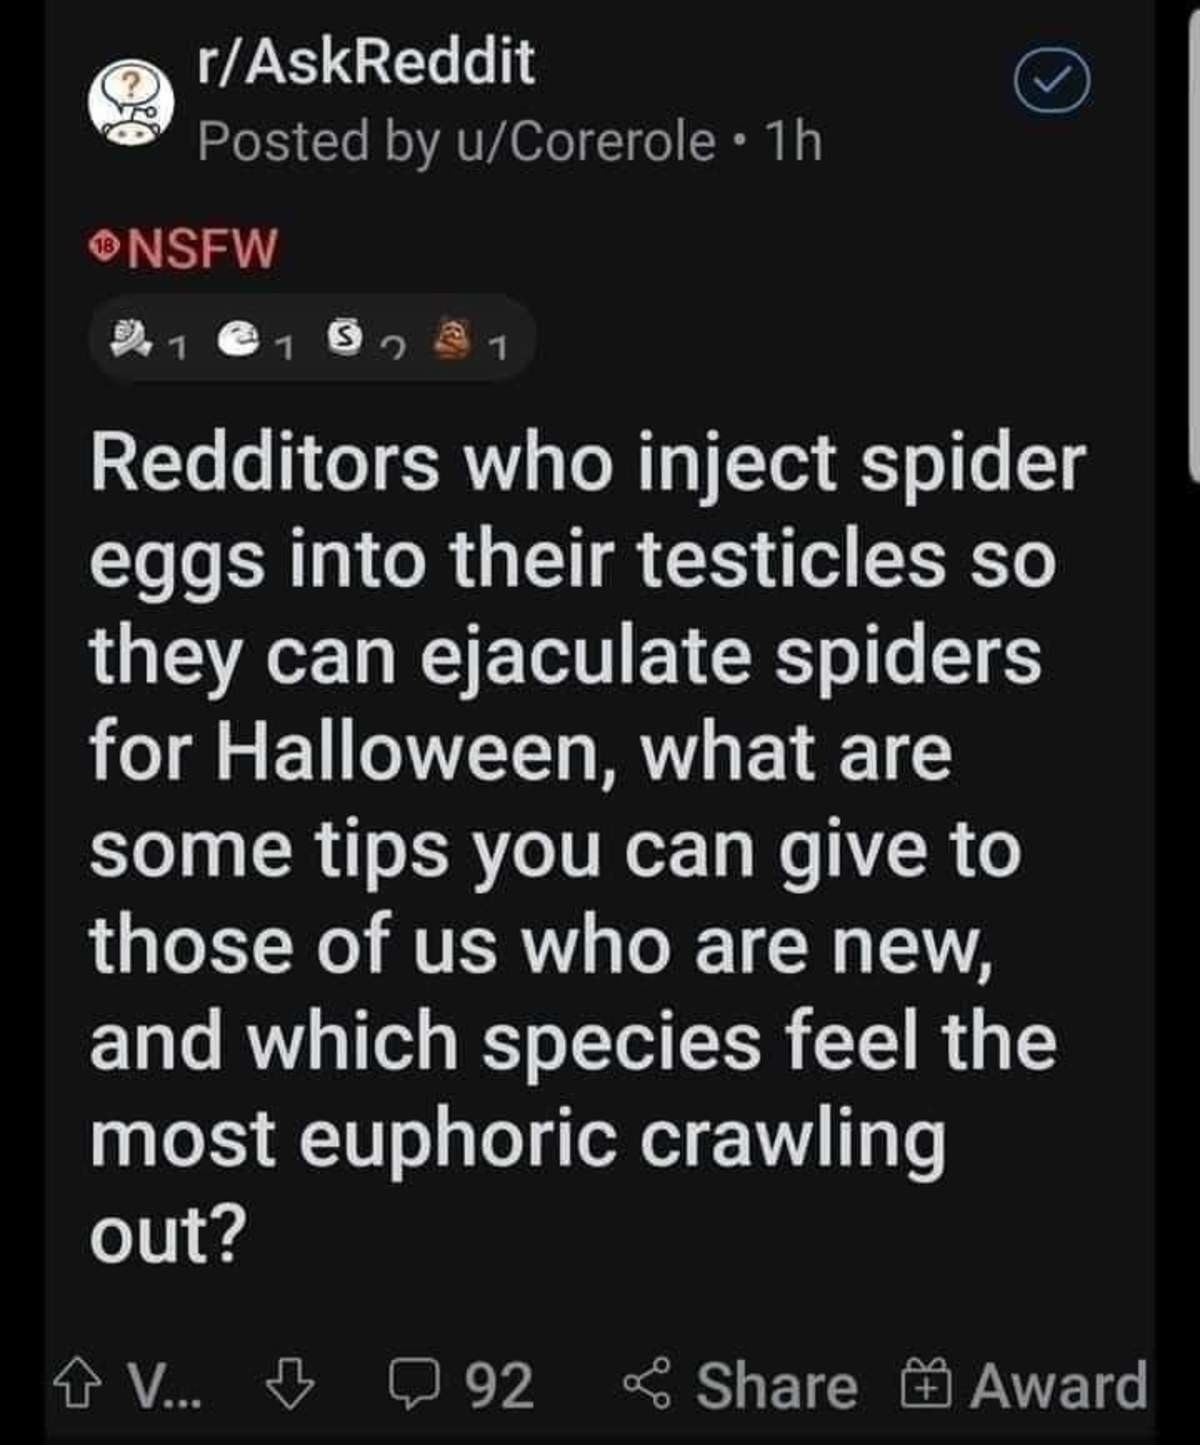 SPIDDER JIZZ IN MY PANTIES. .. Spider coom Spider coom His ejaculate will clear out a room Spits his web, full of slime This post is a crime Watch out, here comes the spider coom